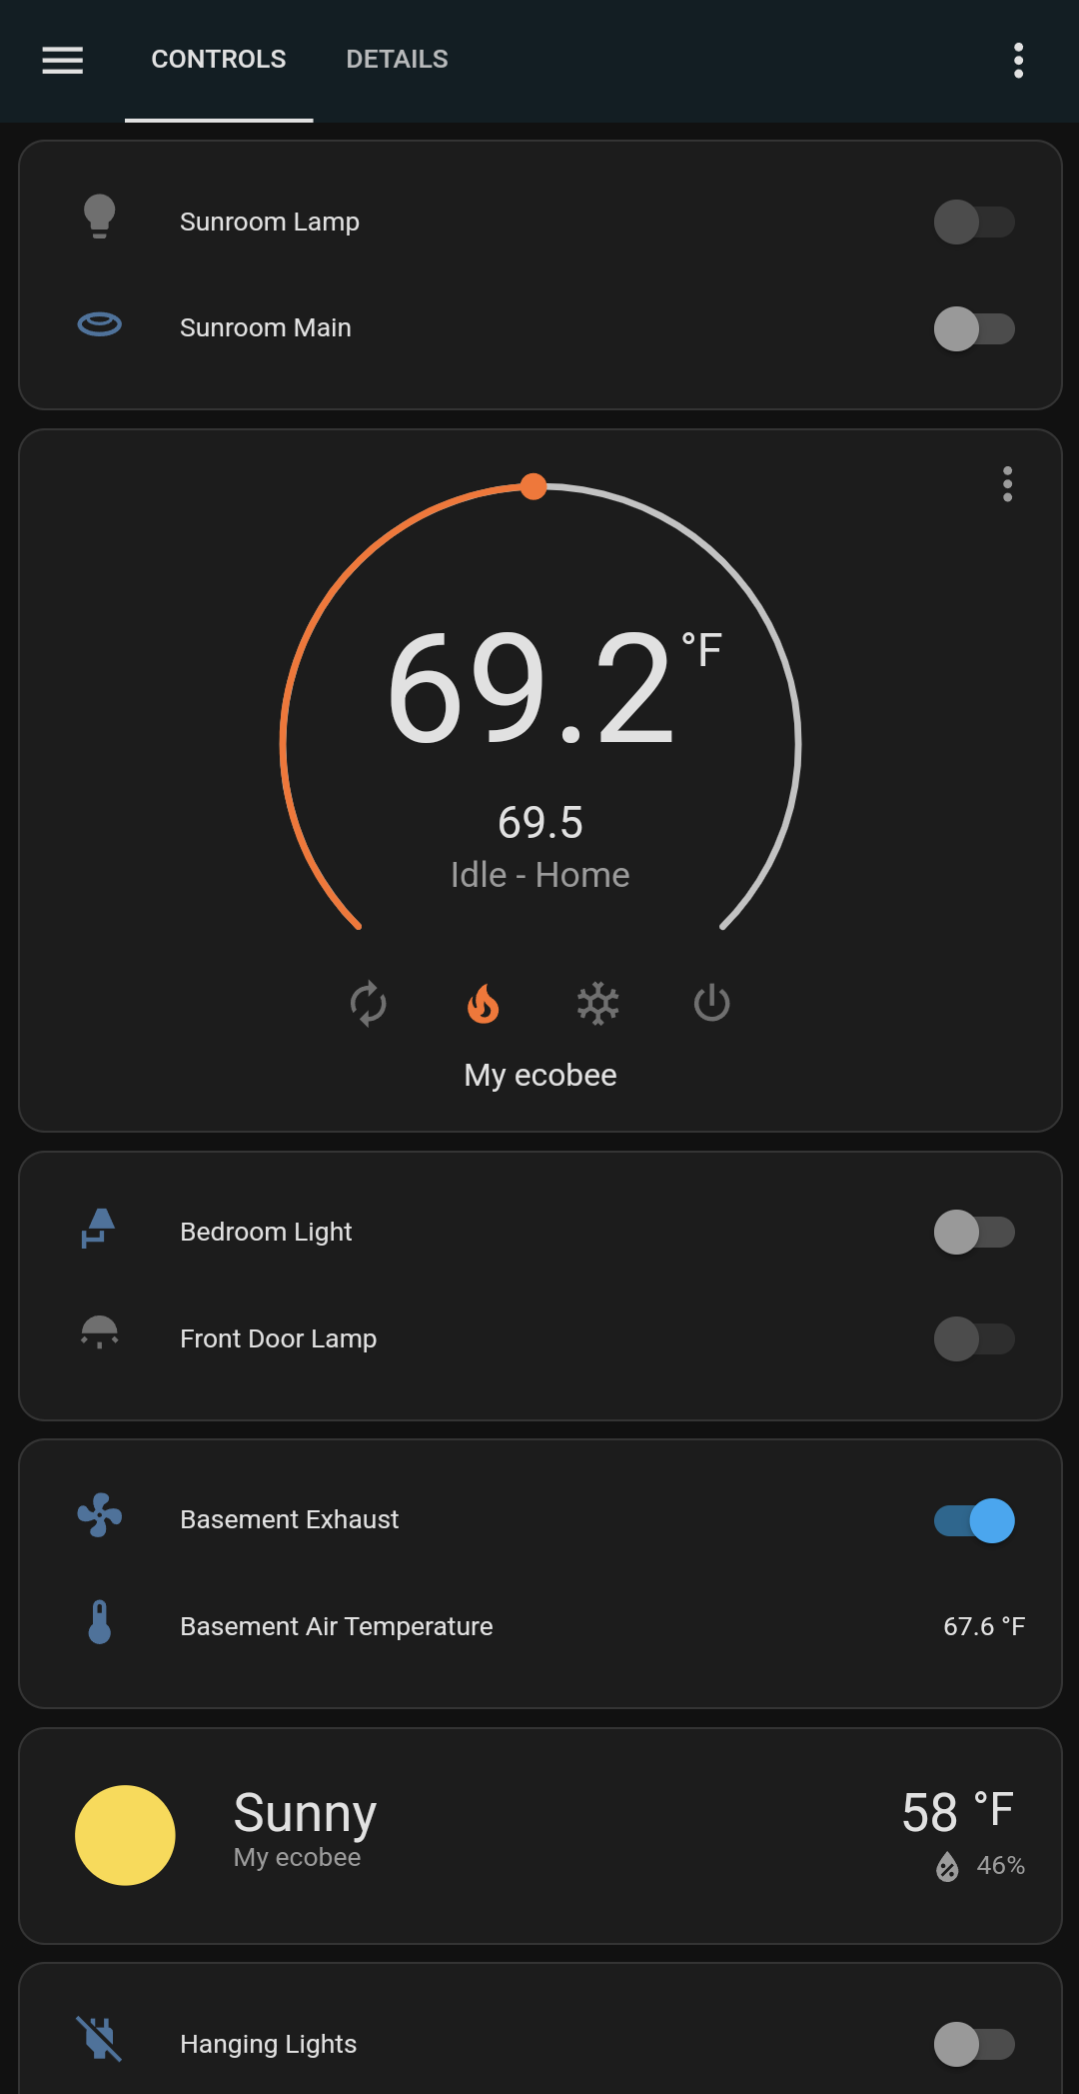 Image of Home Assistant control panel with options to turn lights and thermostat on and off.